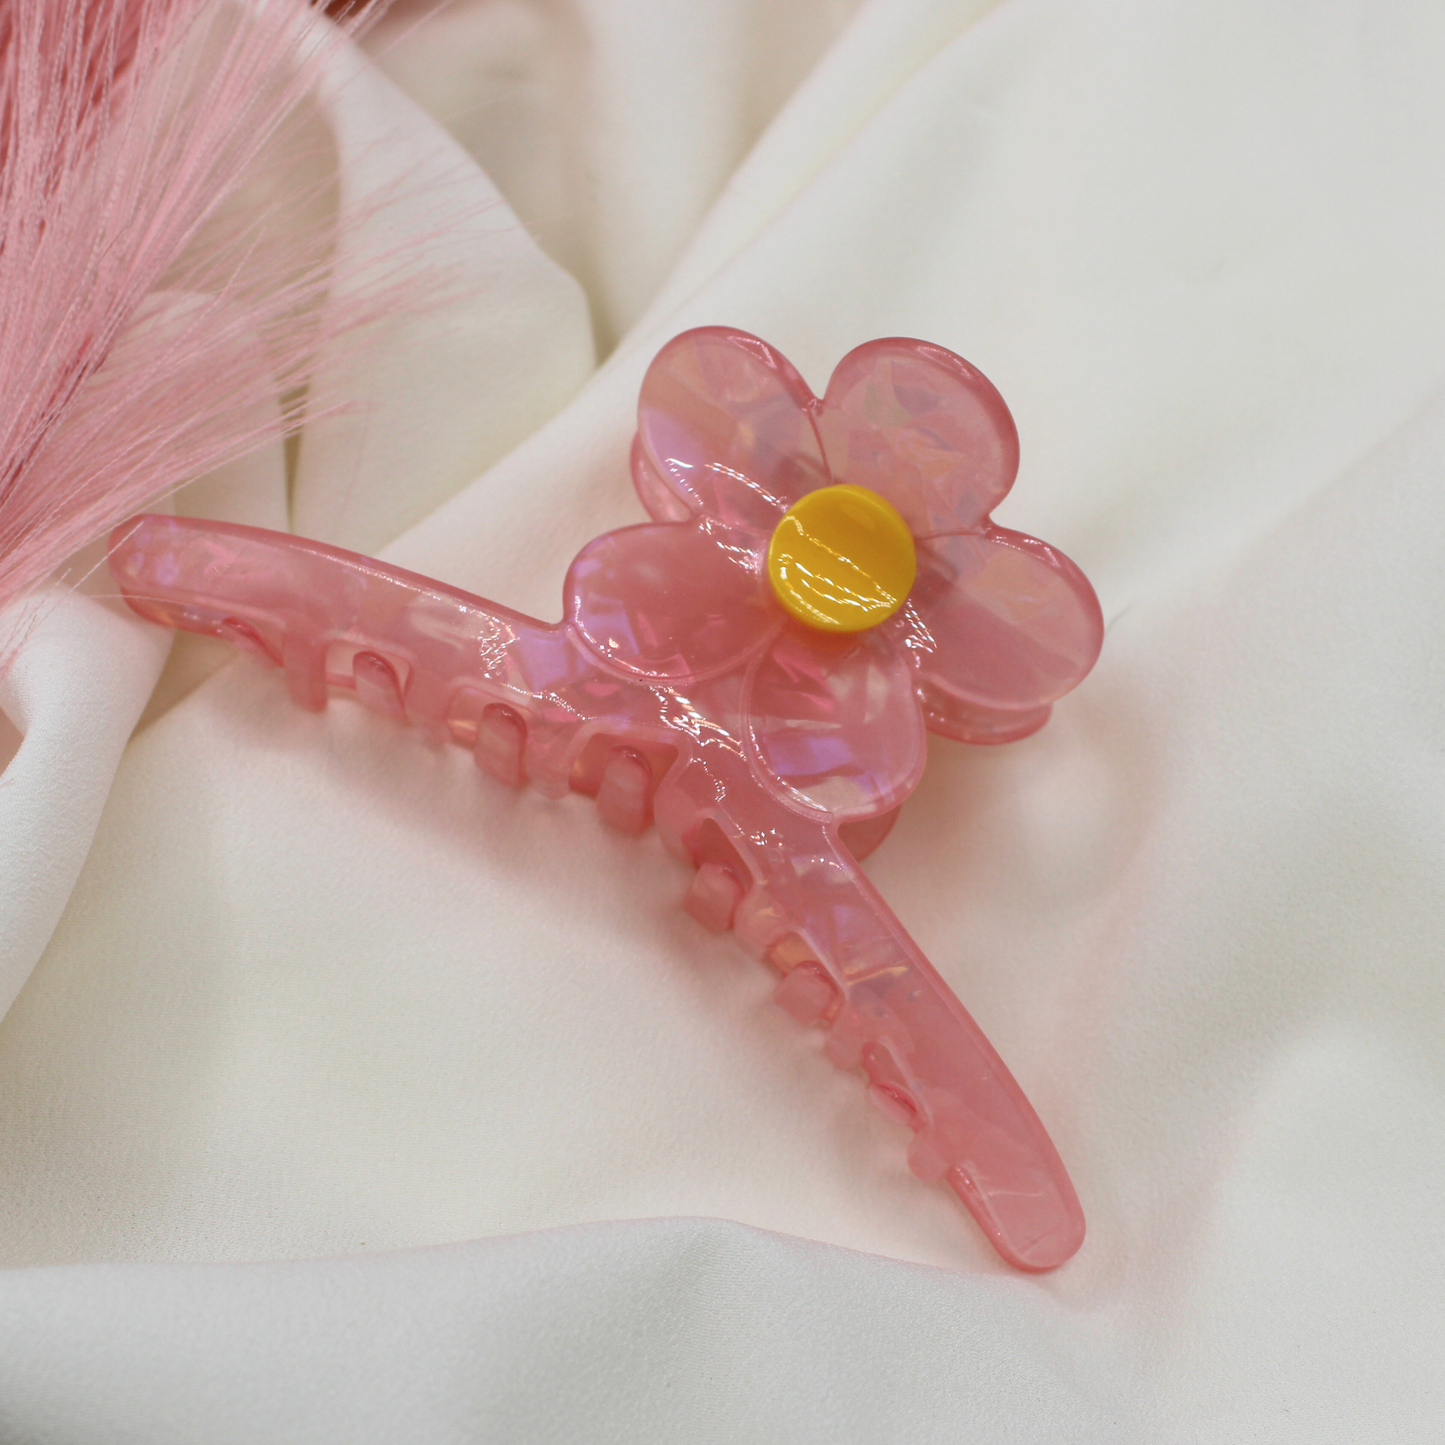 Alyssa Cellulose Acetate Hair Claw Clips